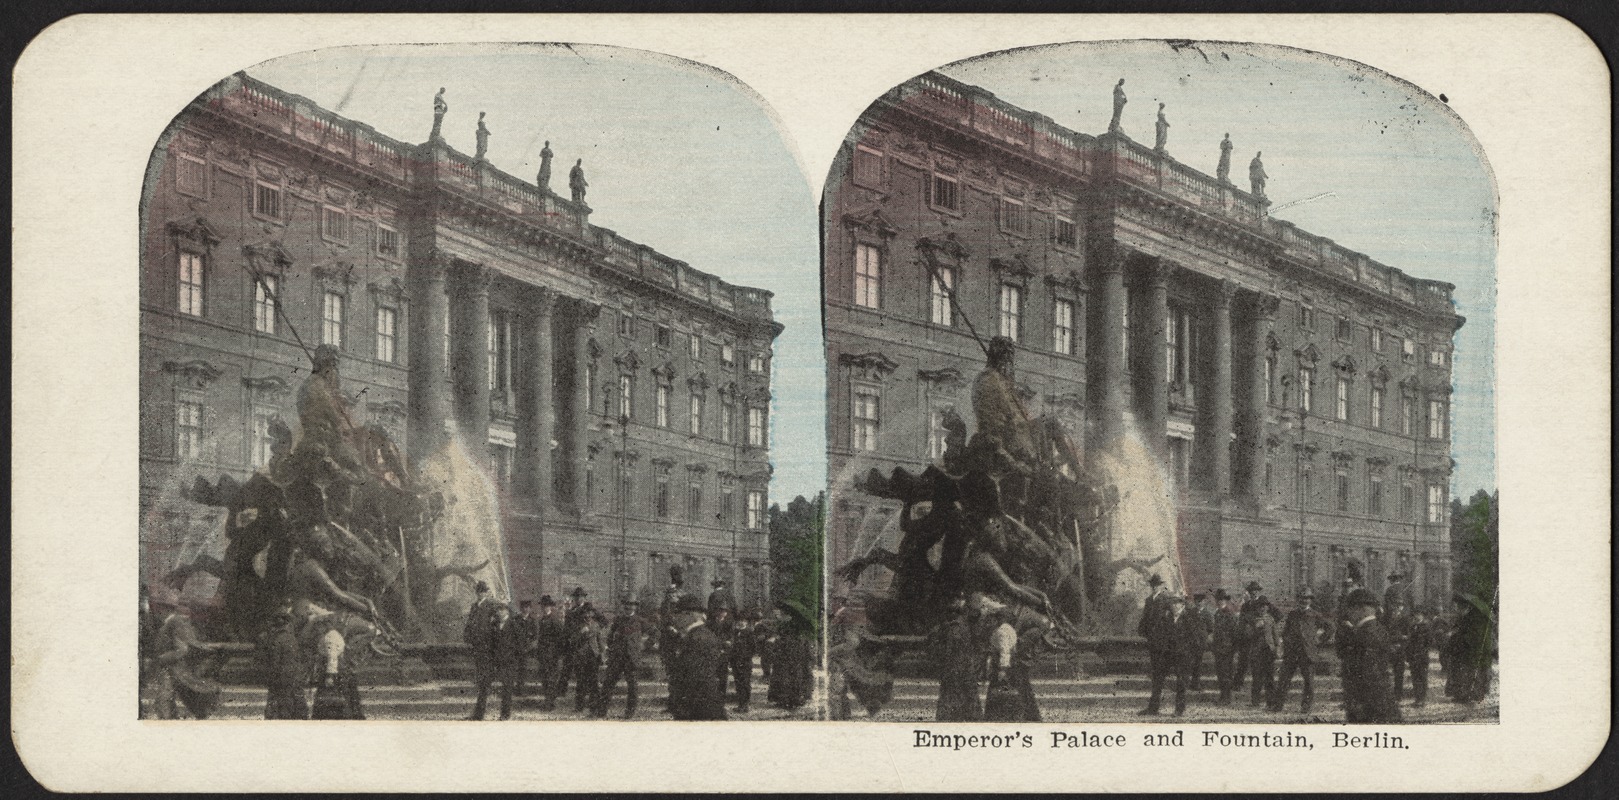 Emperor's palace and fountain, Berlin